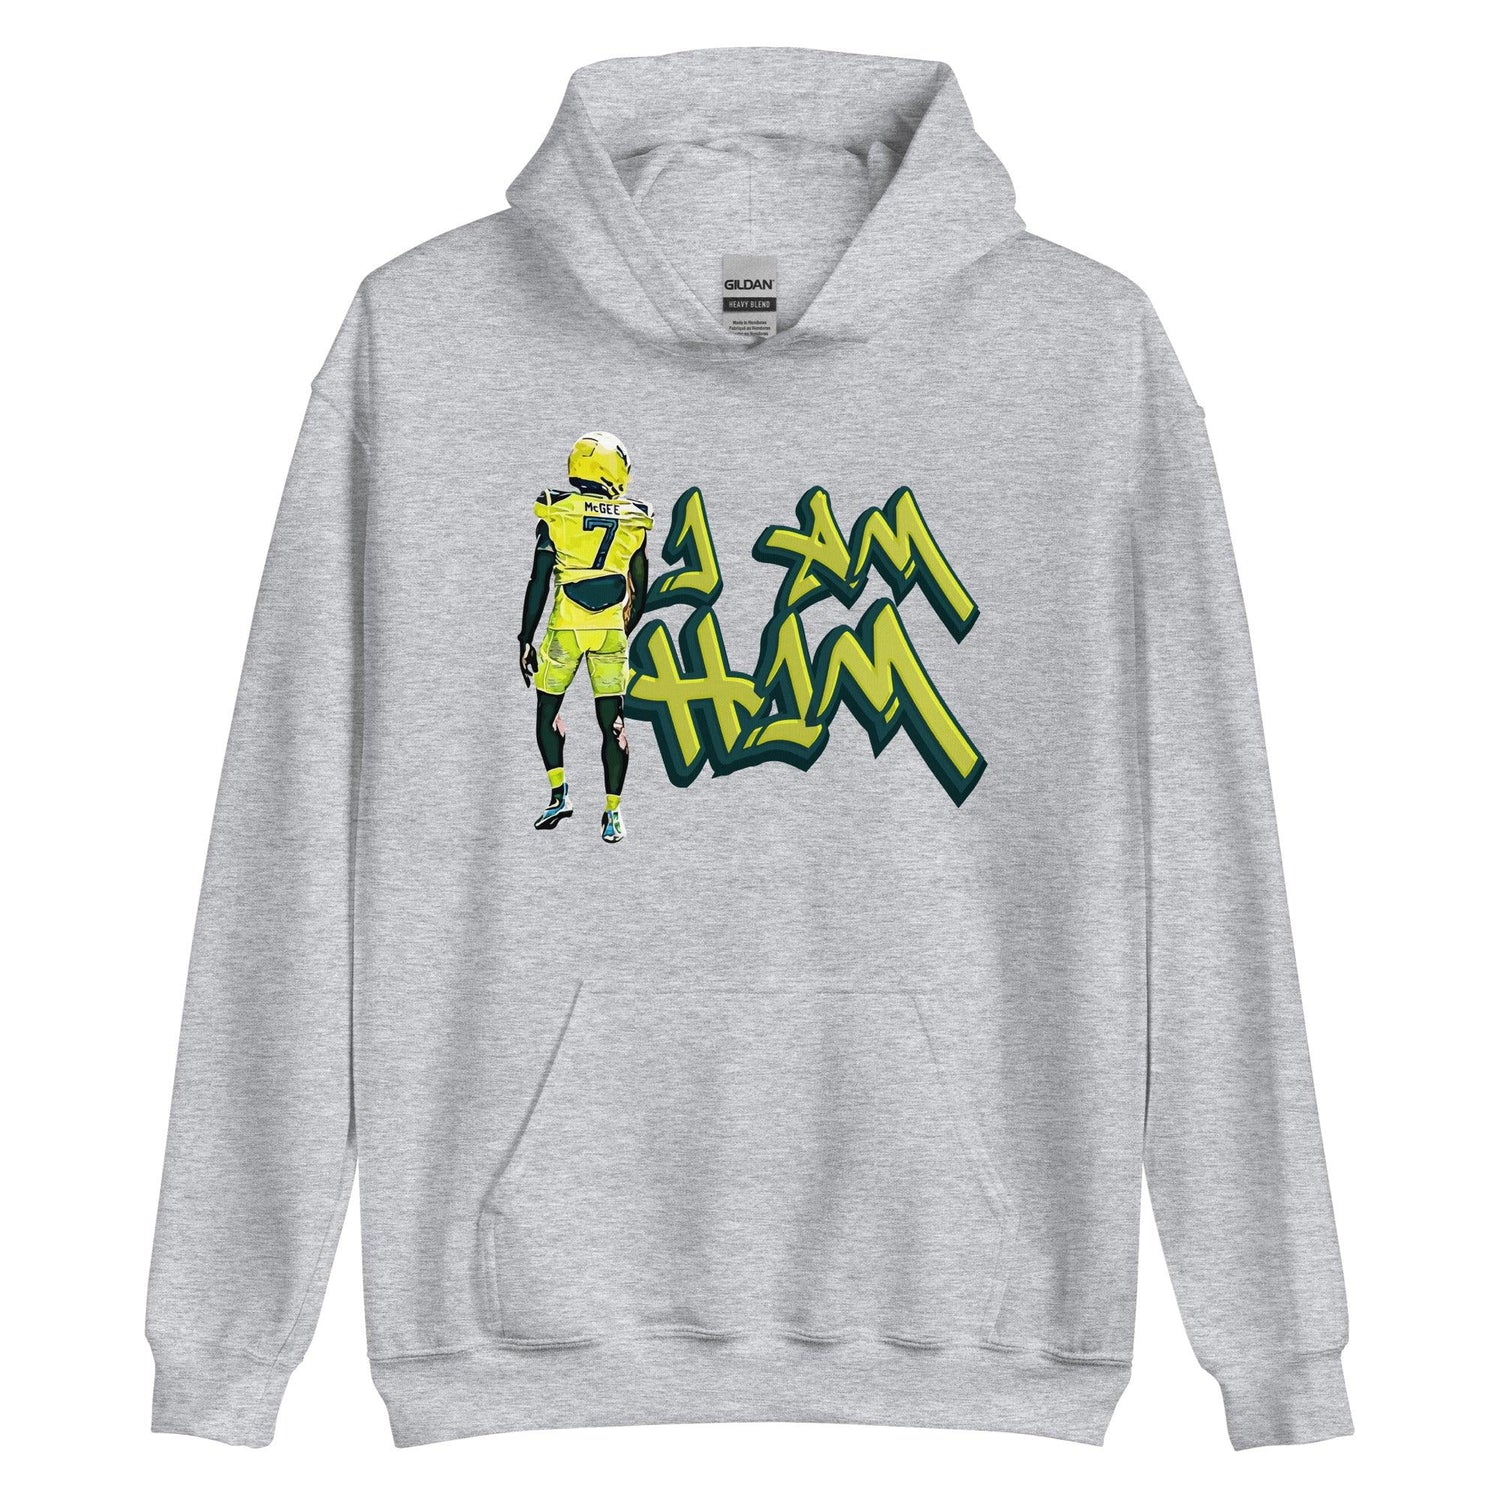 Seven McGee "I AM HIM" Hoodie - Fan Arch